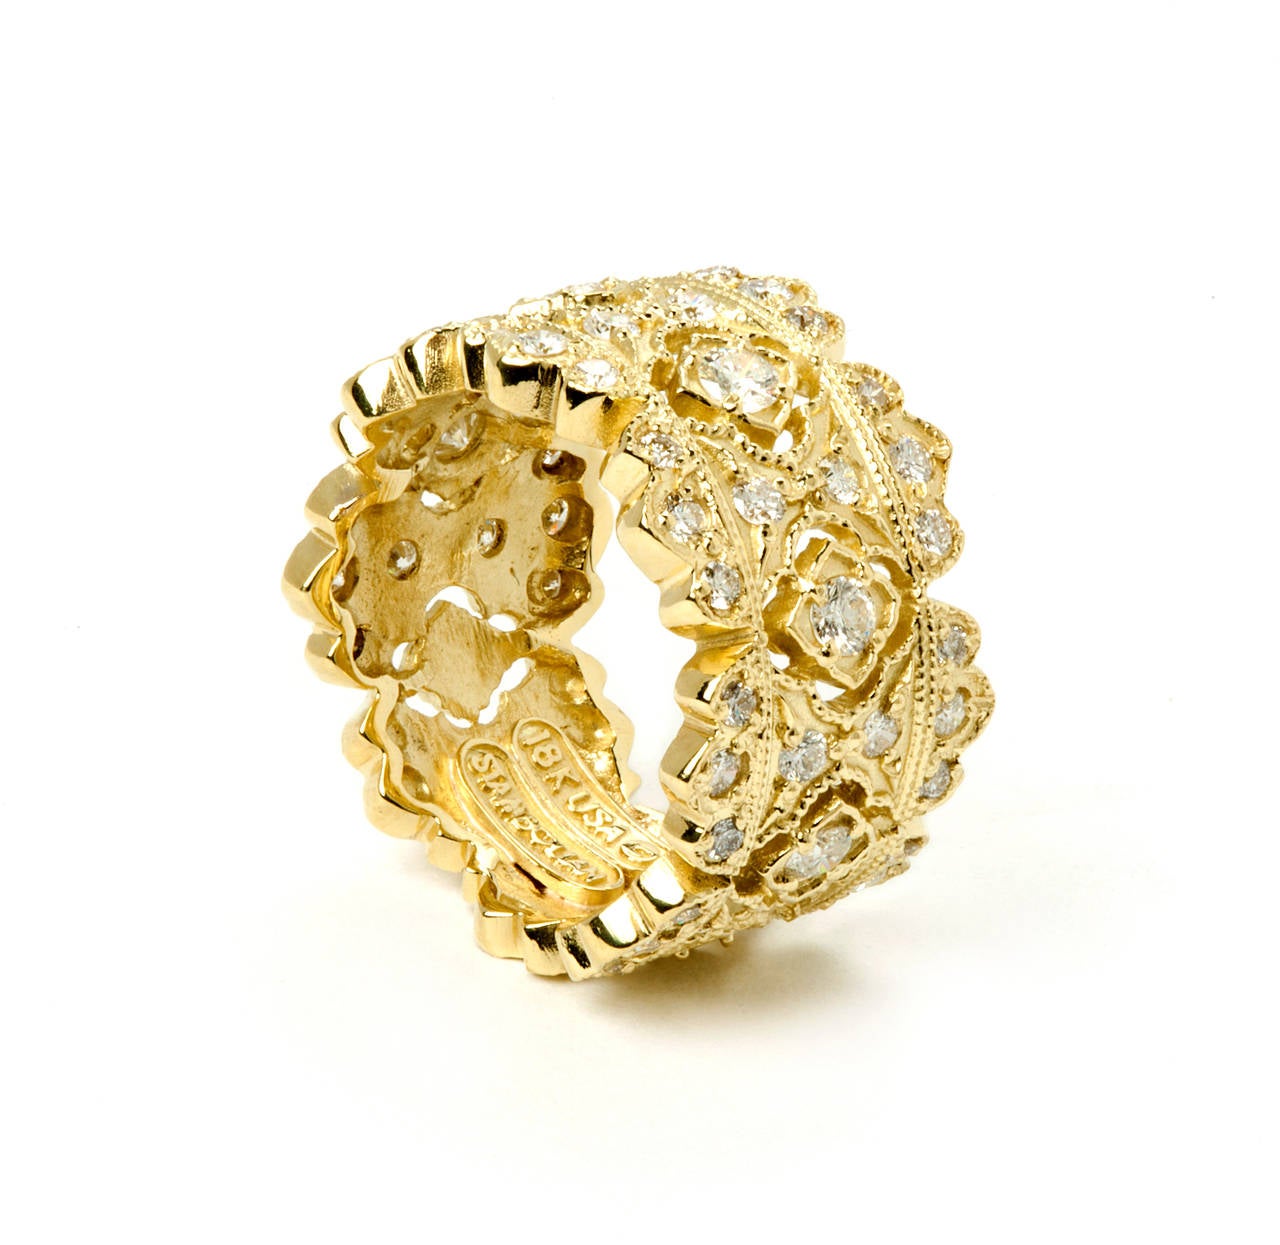 Stambolian 18 Karat Yellow Gold Diamond Wide Band Ring

This is the band ring from the 